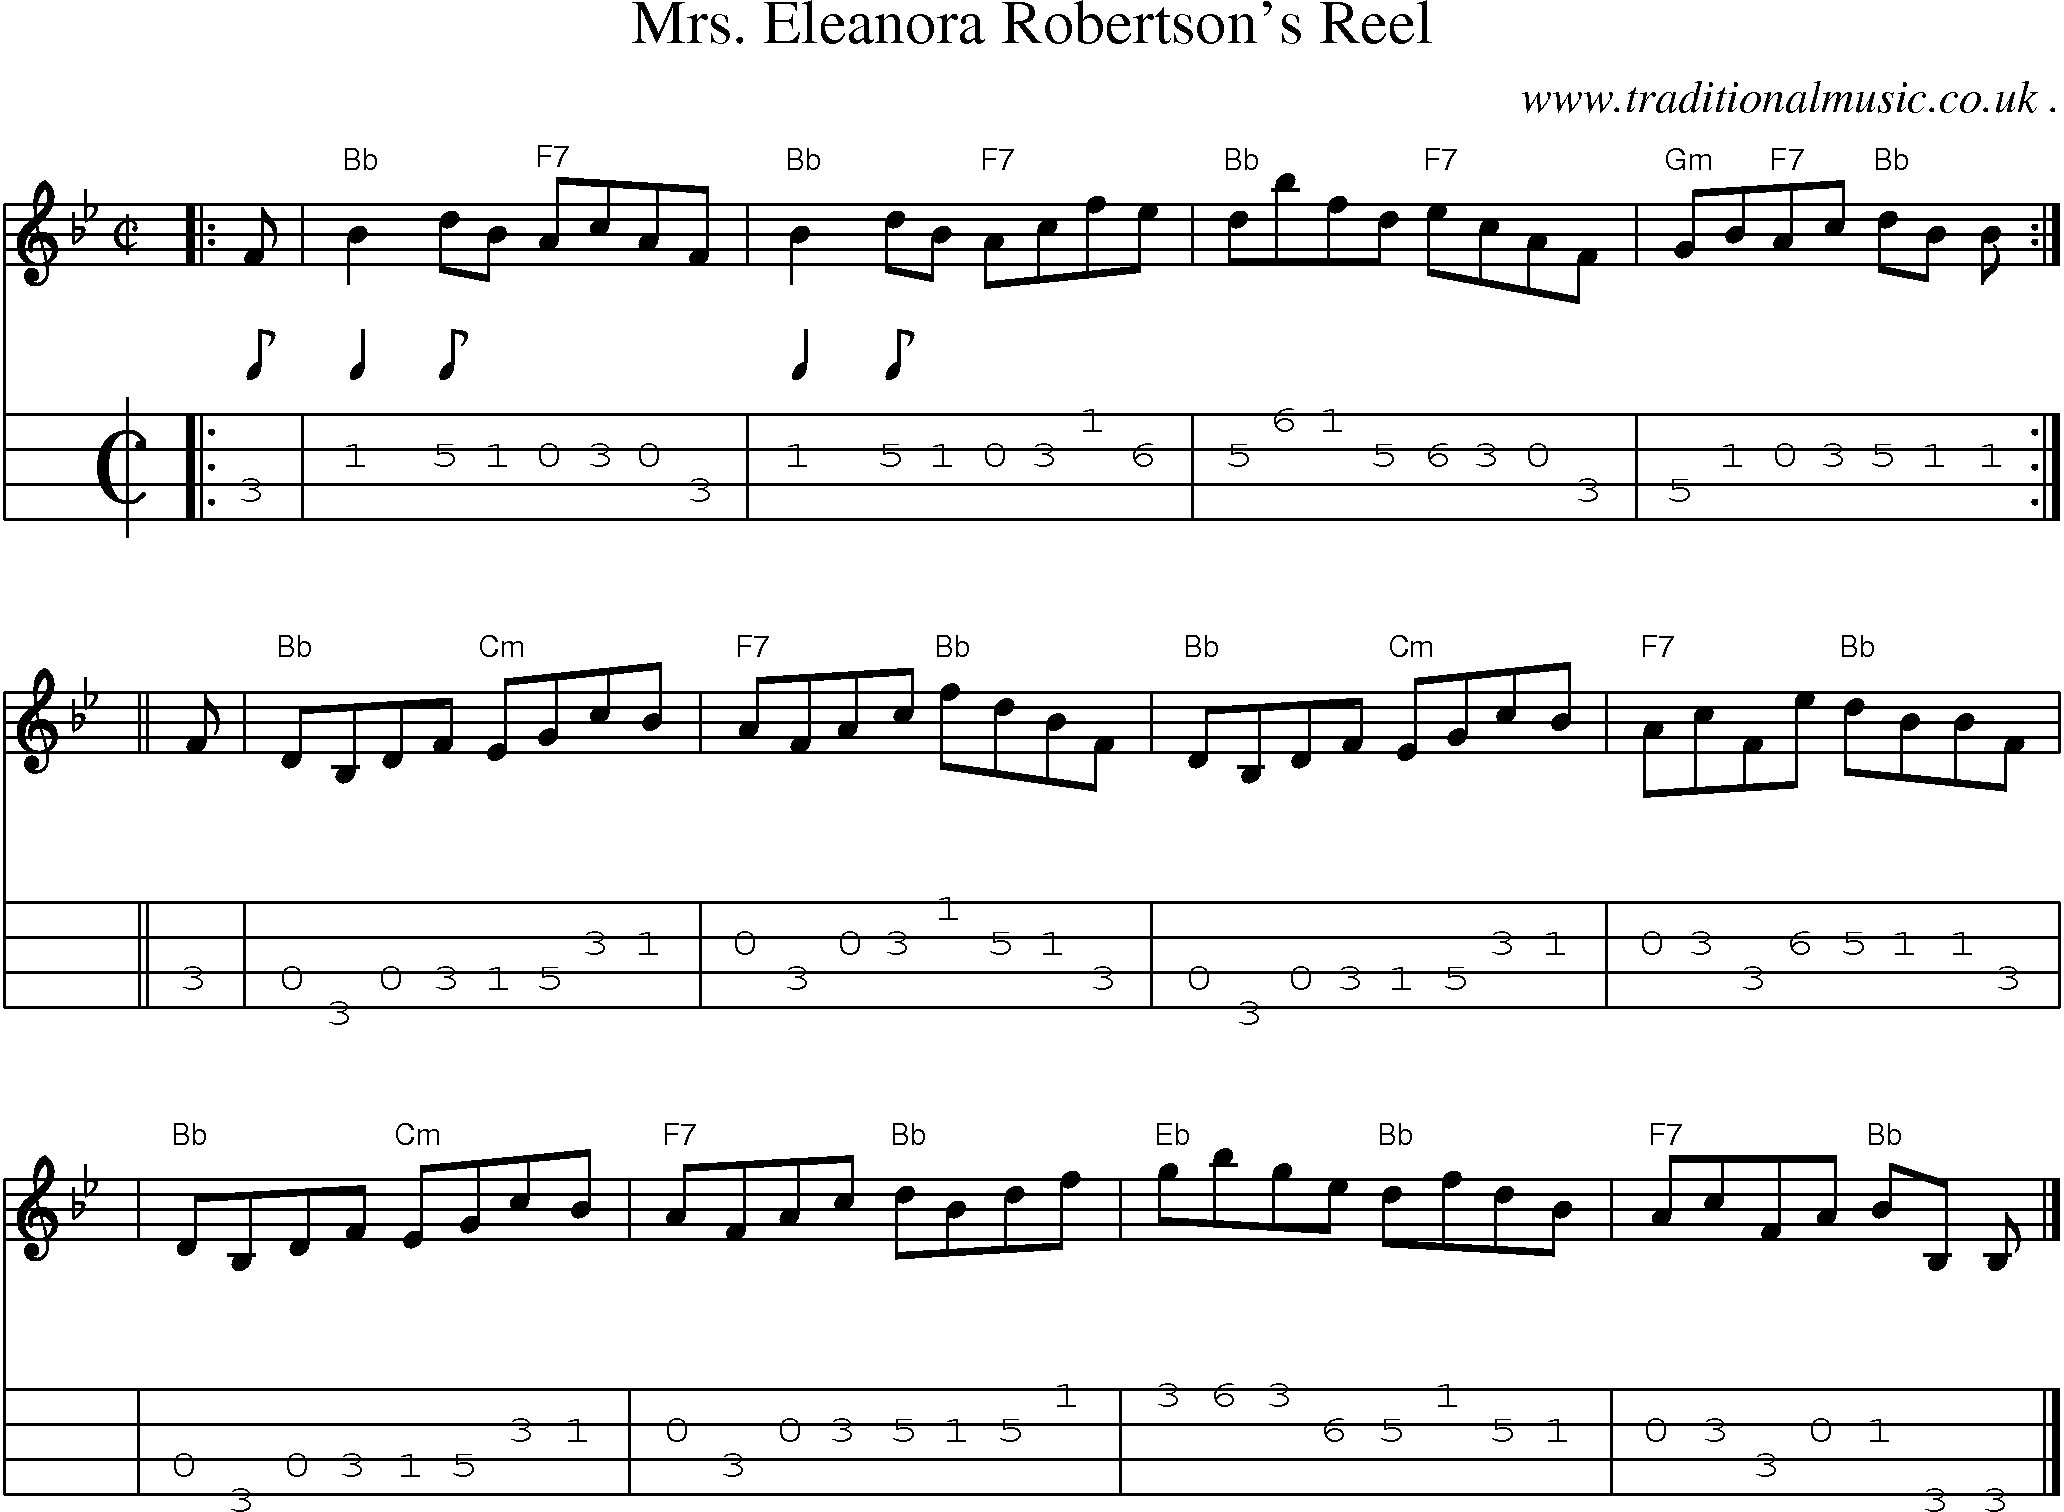 Sheet-music  score, Chords and Mandolin Tabs for Mrs Eleanora Robertsons Reel